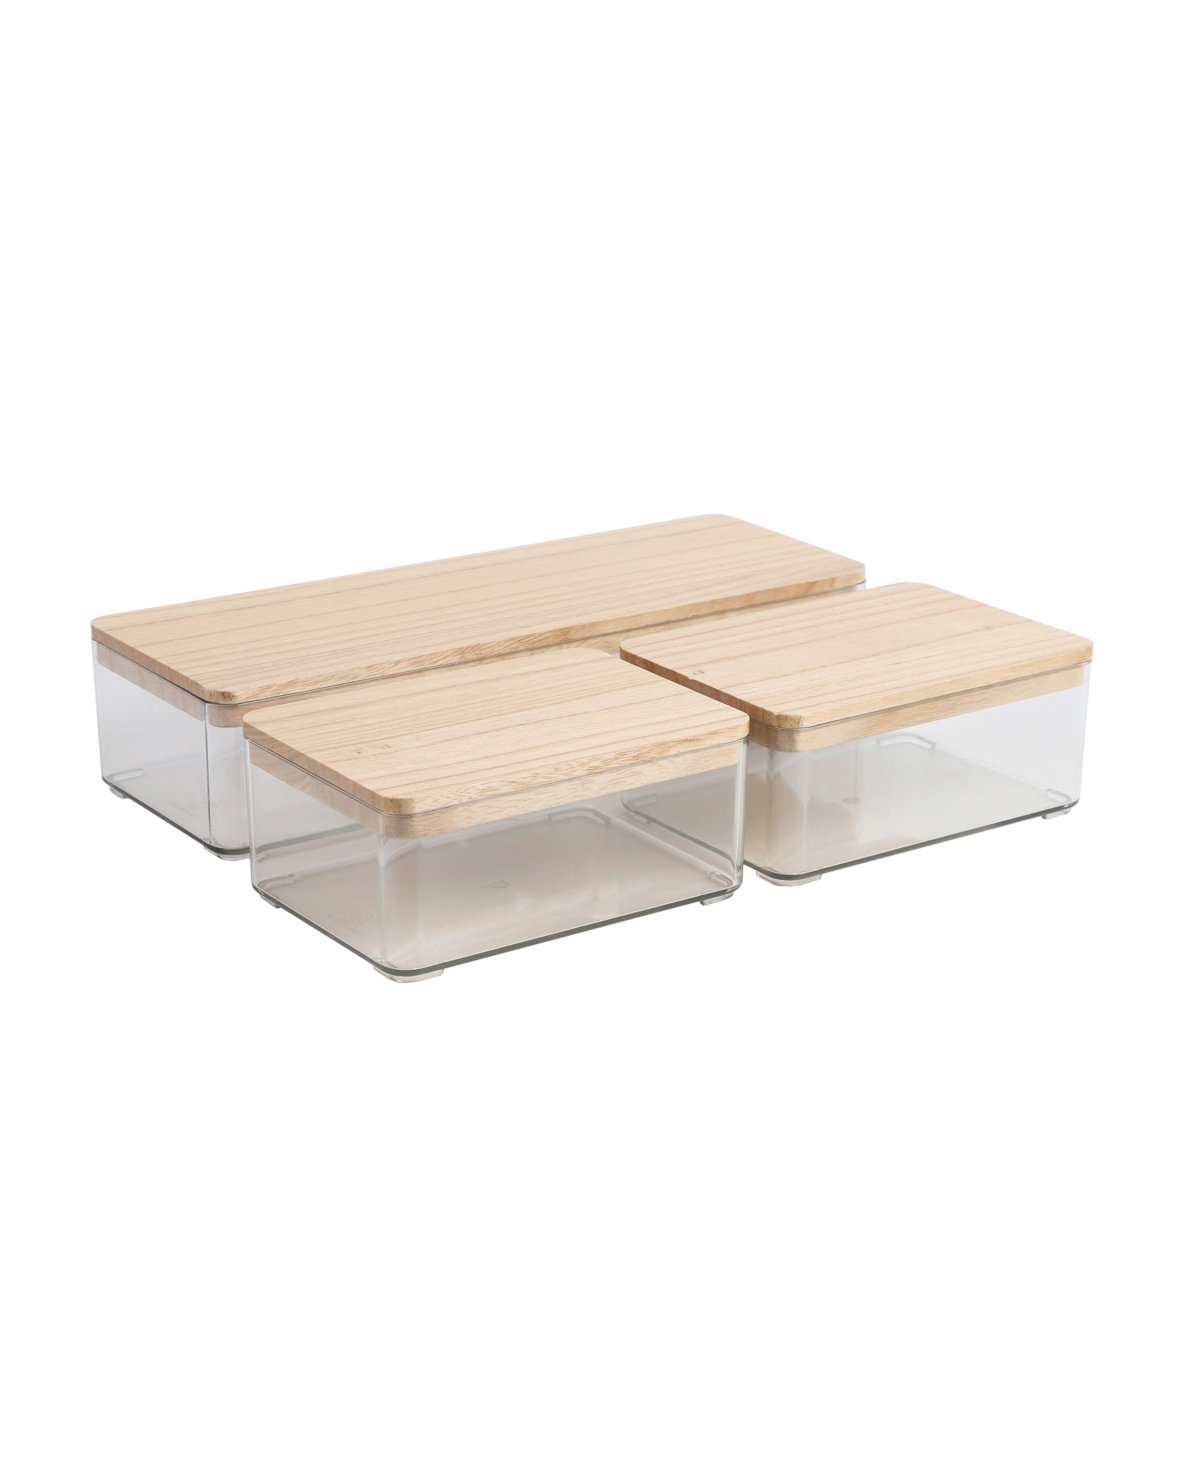 Grady Set of 3 Plastic Stackable Storage Boxes with Paulownia Wood Lids - Clear, Light Natural